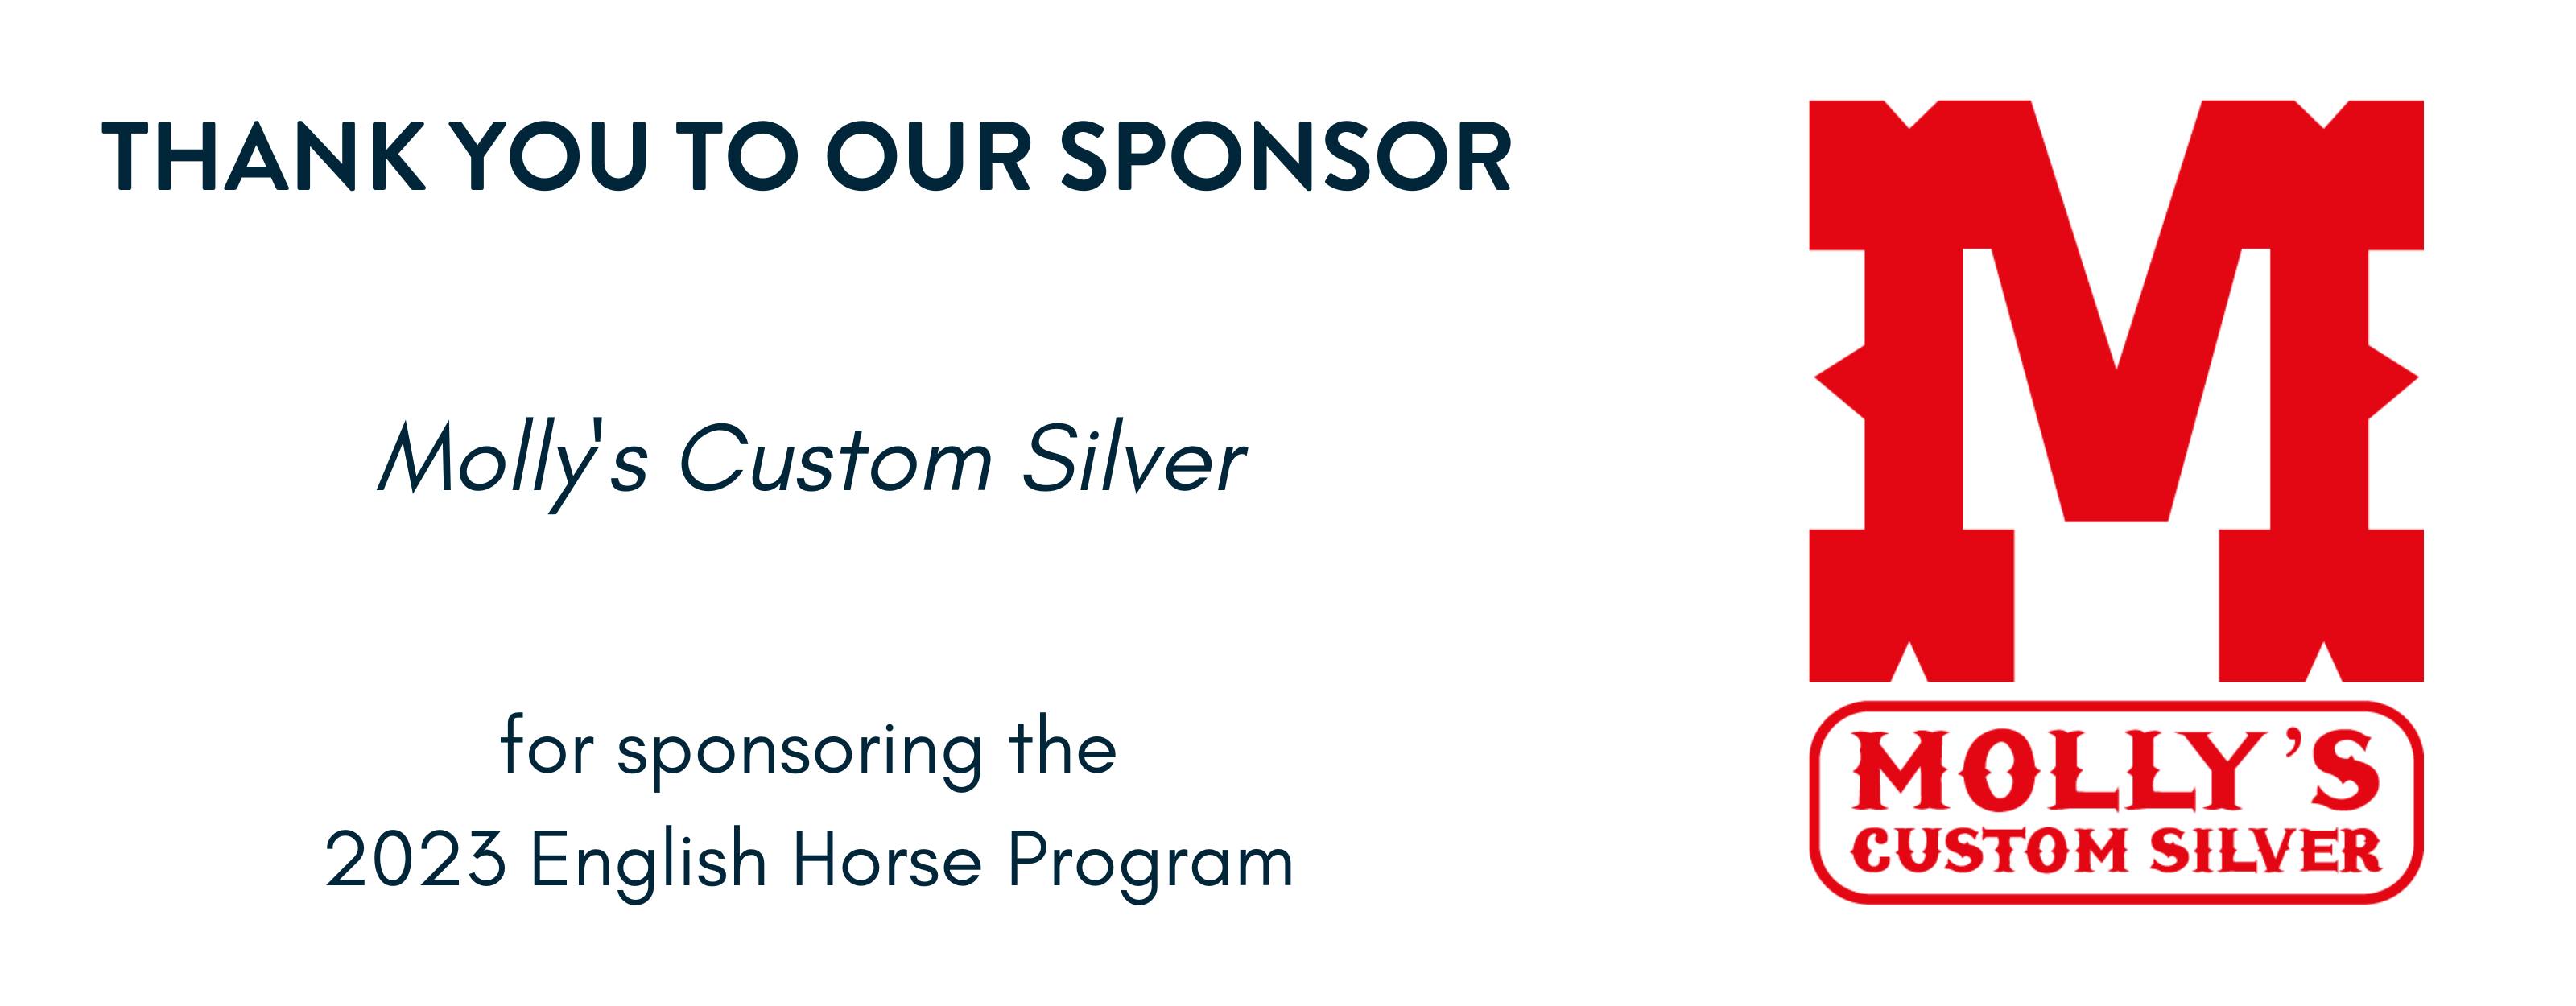 Thank you to Molly’s Custom Silver for sponsoring our 2023 Western Horse program, English Horse program, and Livestock Program